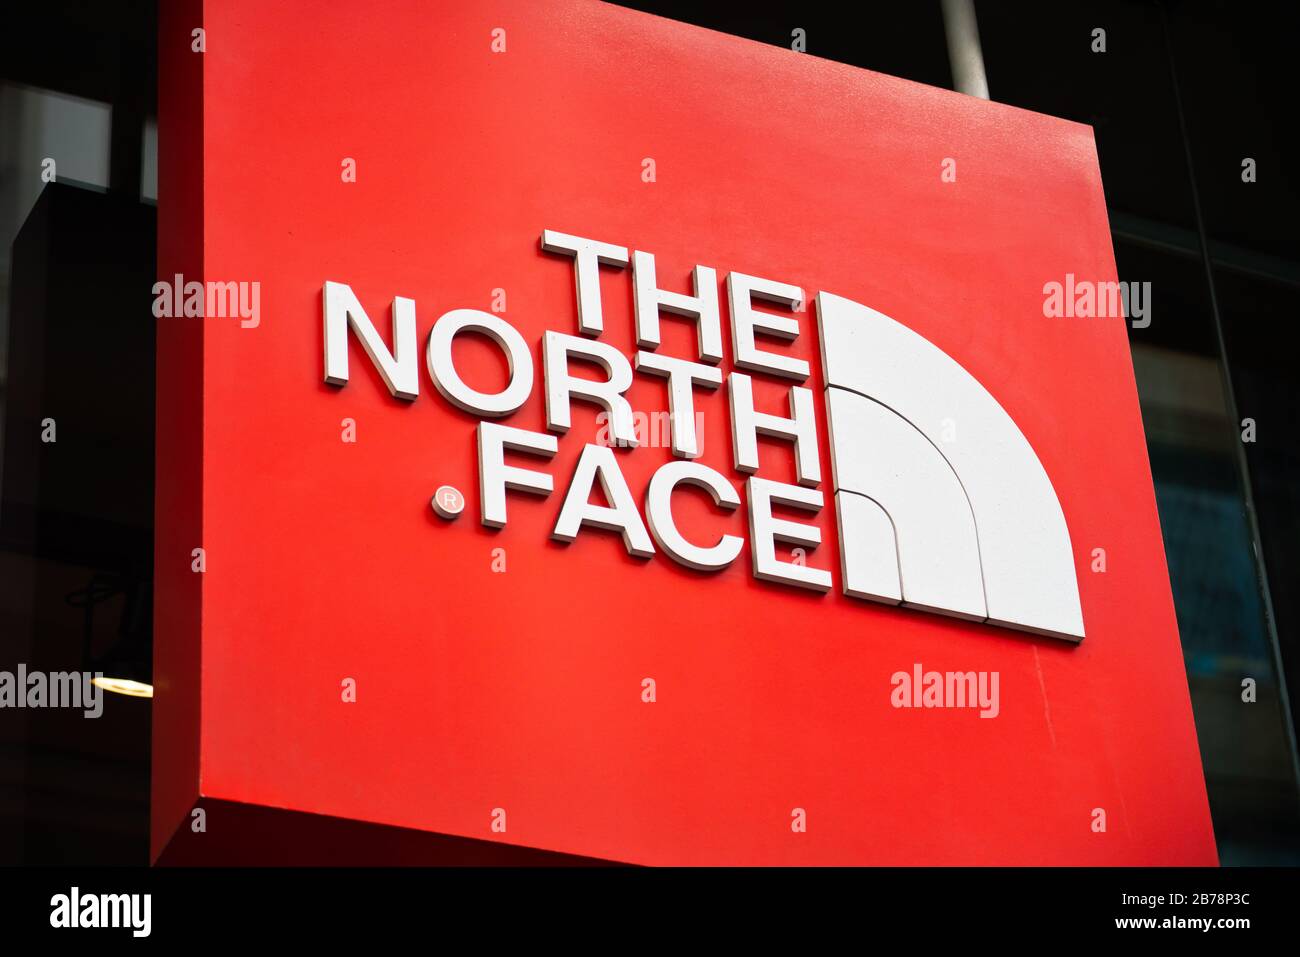 American outdoor recreation product company The North Face logo Stock Photo  - Alamy